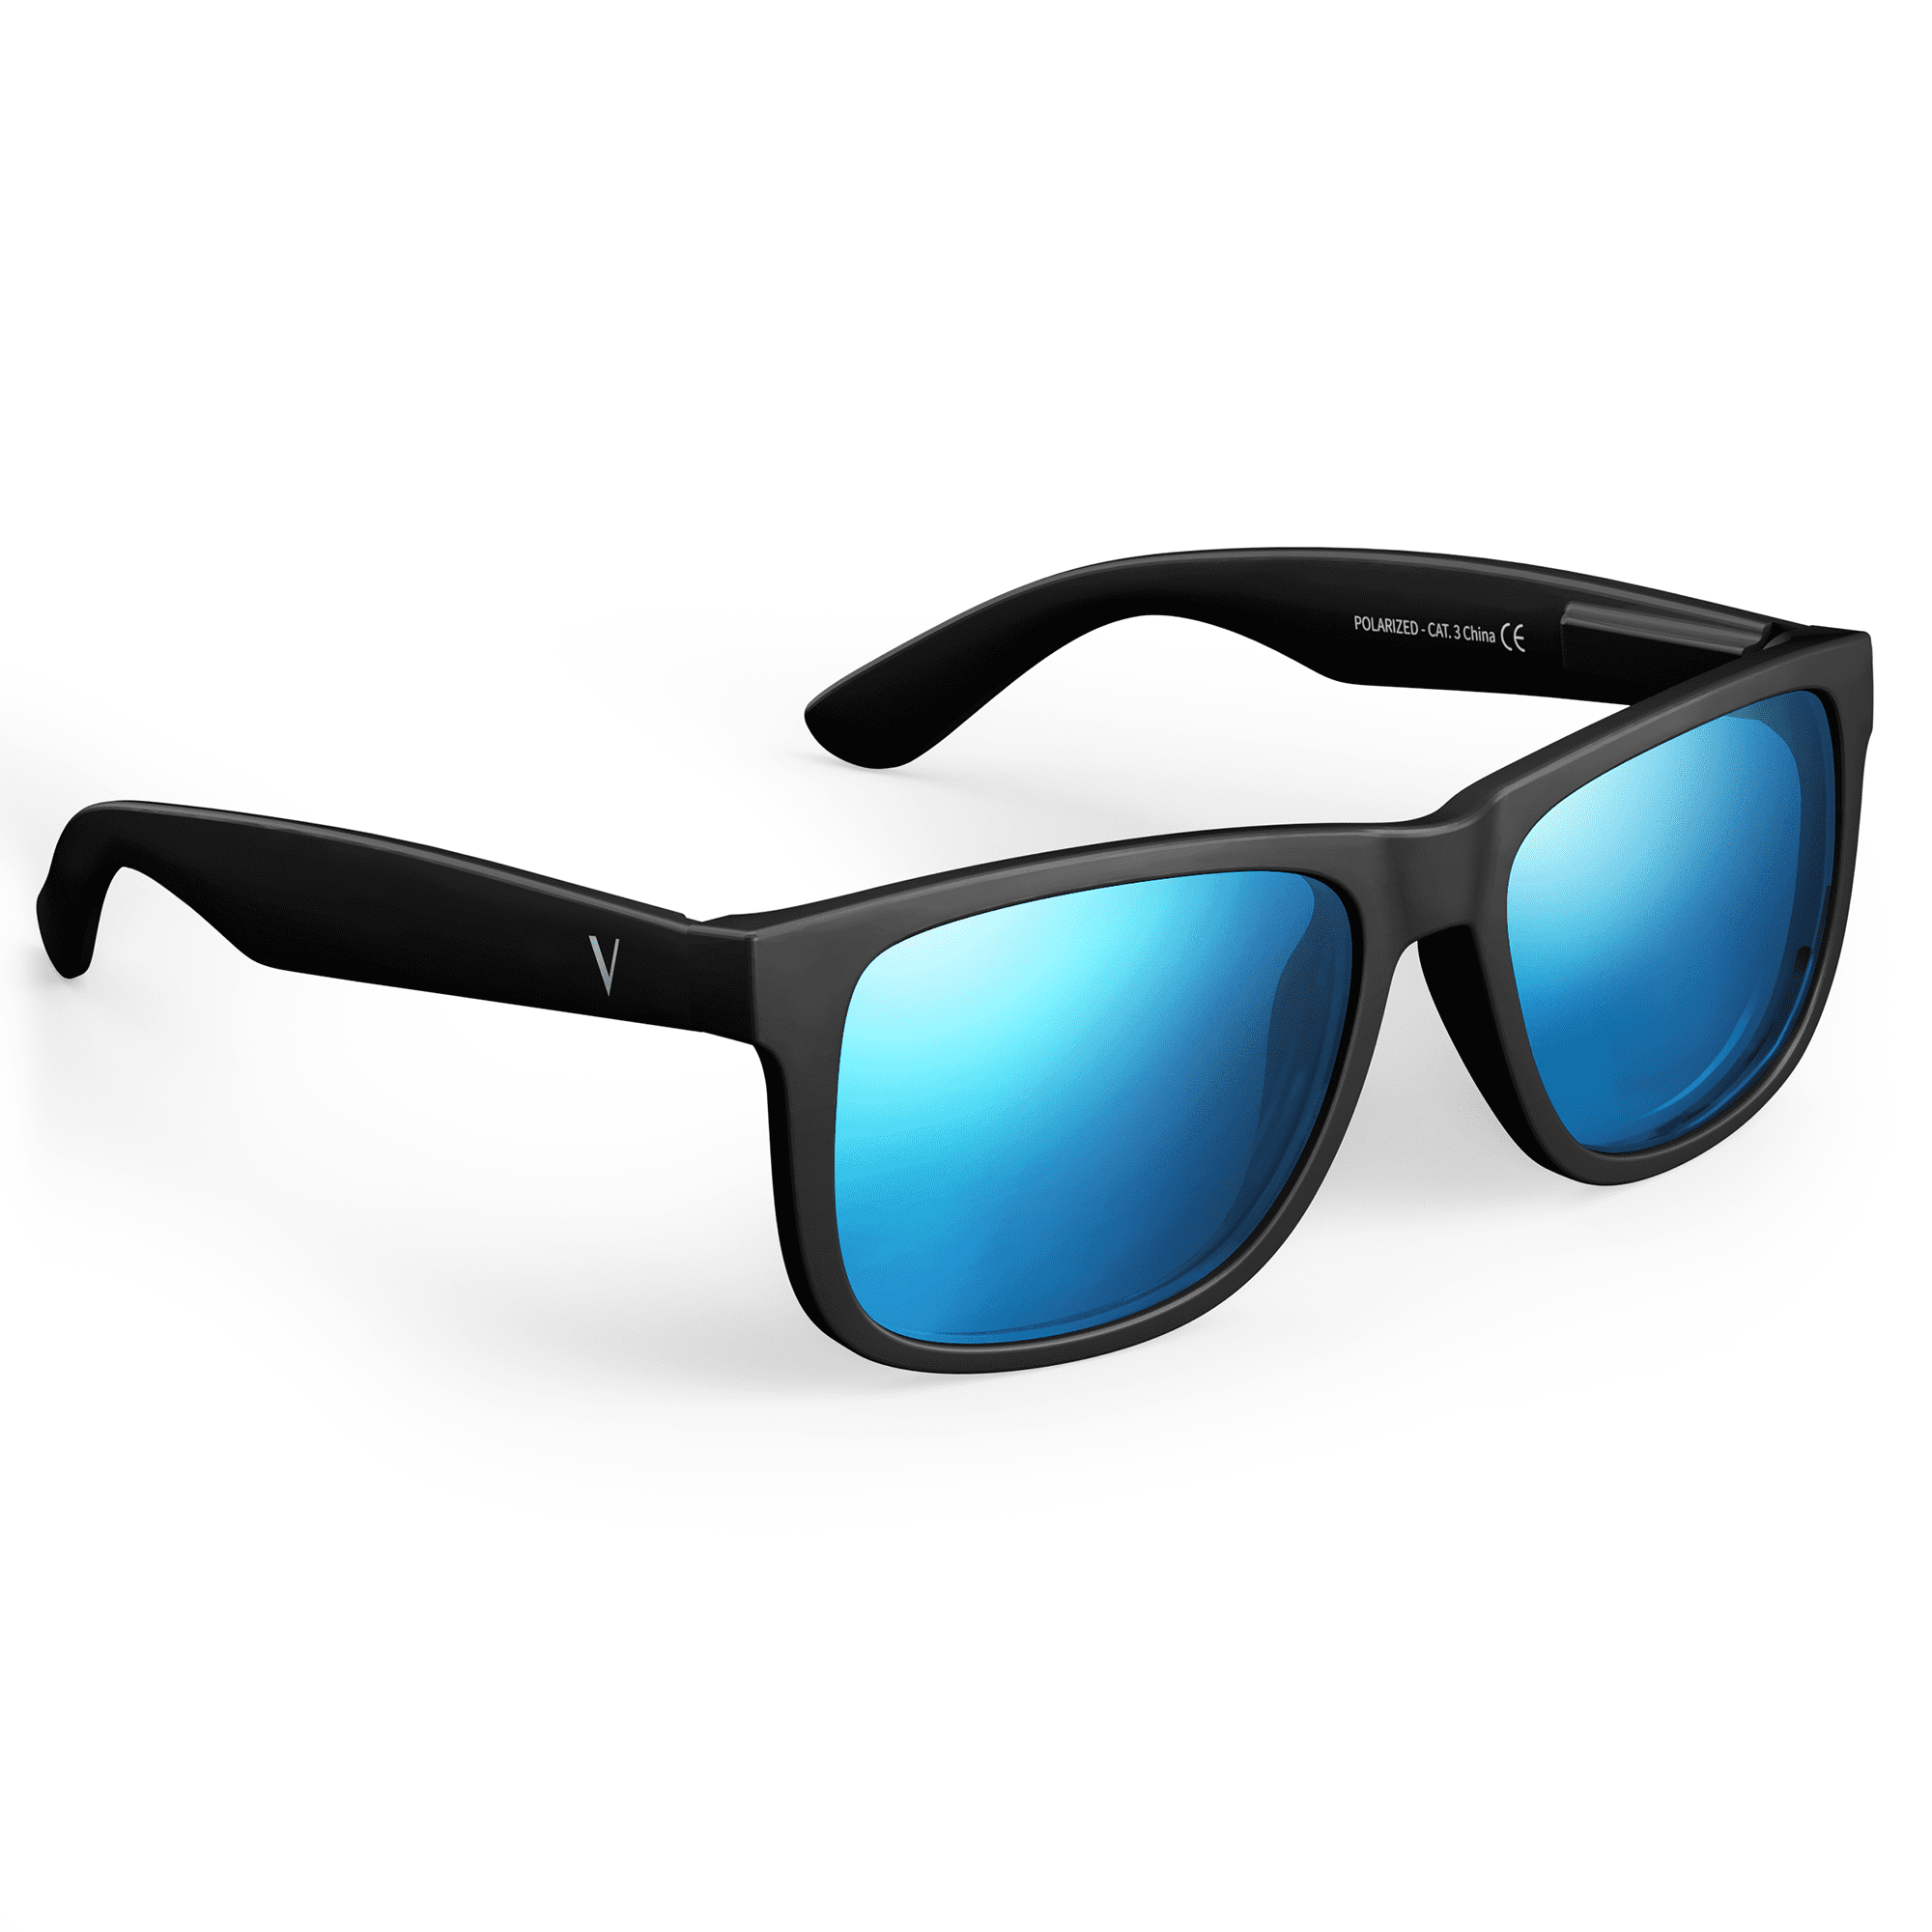 Vanmage Hanauma Polarized Sunglasses for Men and Women with UV Protection, Classic Black Square Frame Fishing Driving Shades